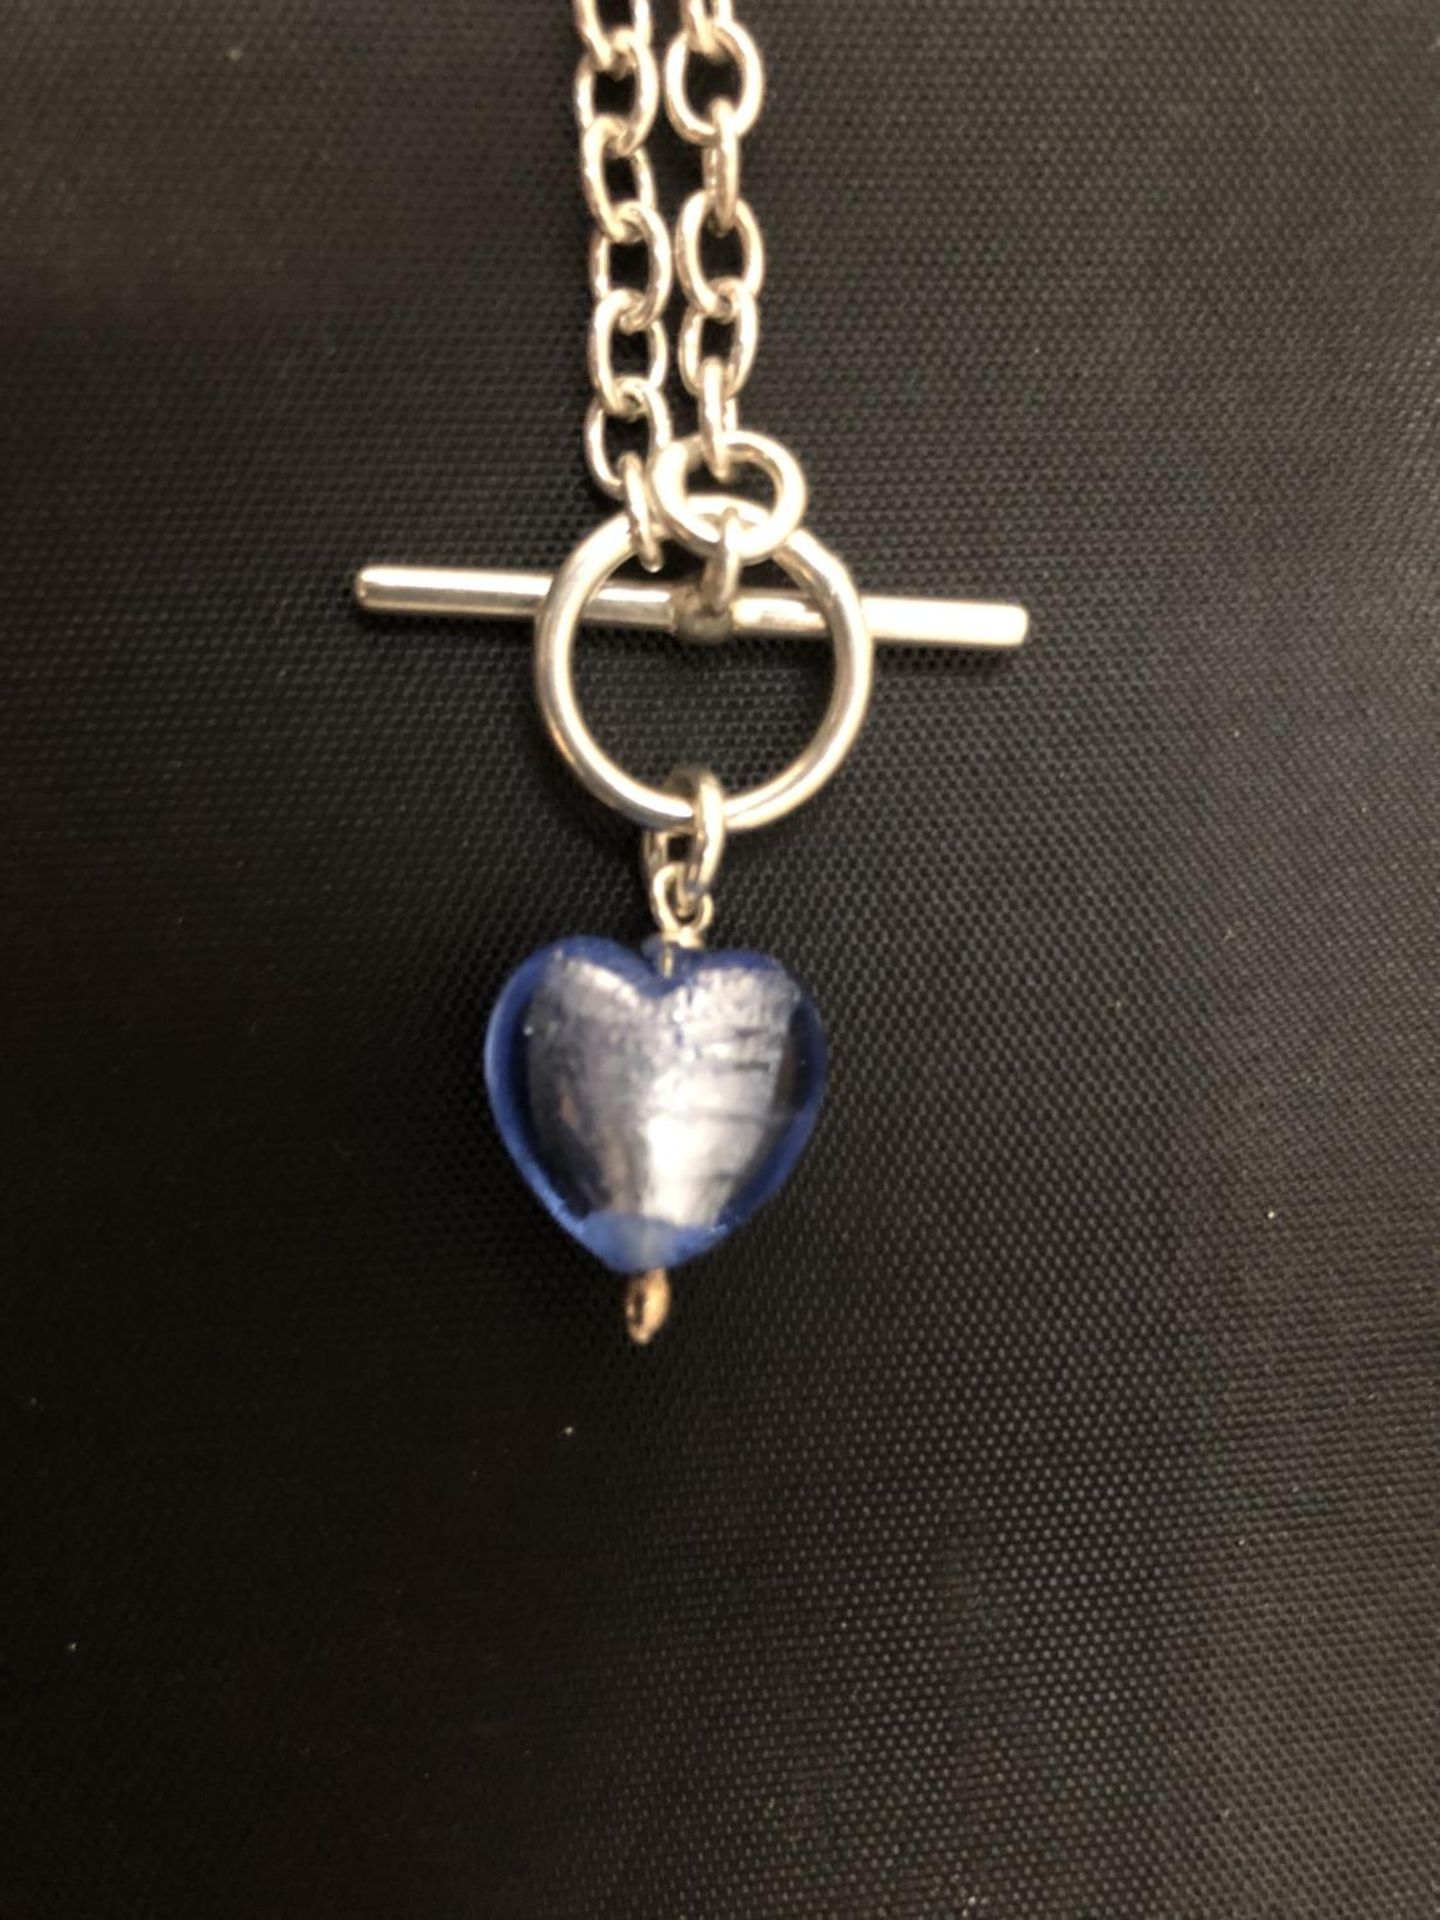 A SILVER T-BAR NECKLACE WITH A BLUE STONE - Image 2 of 2